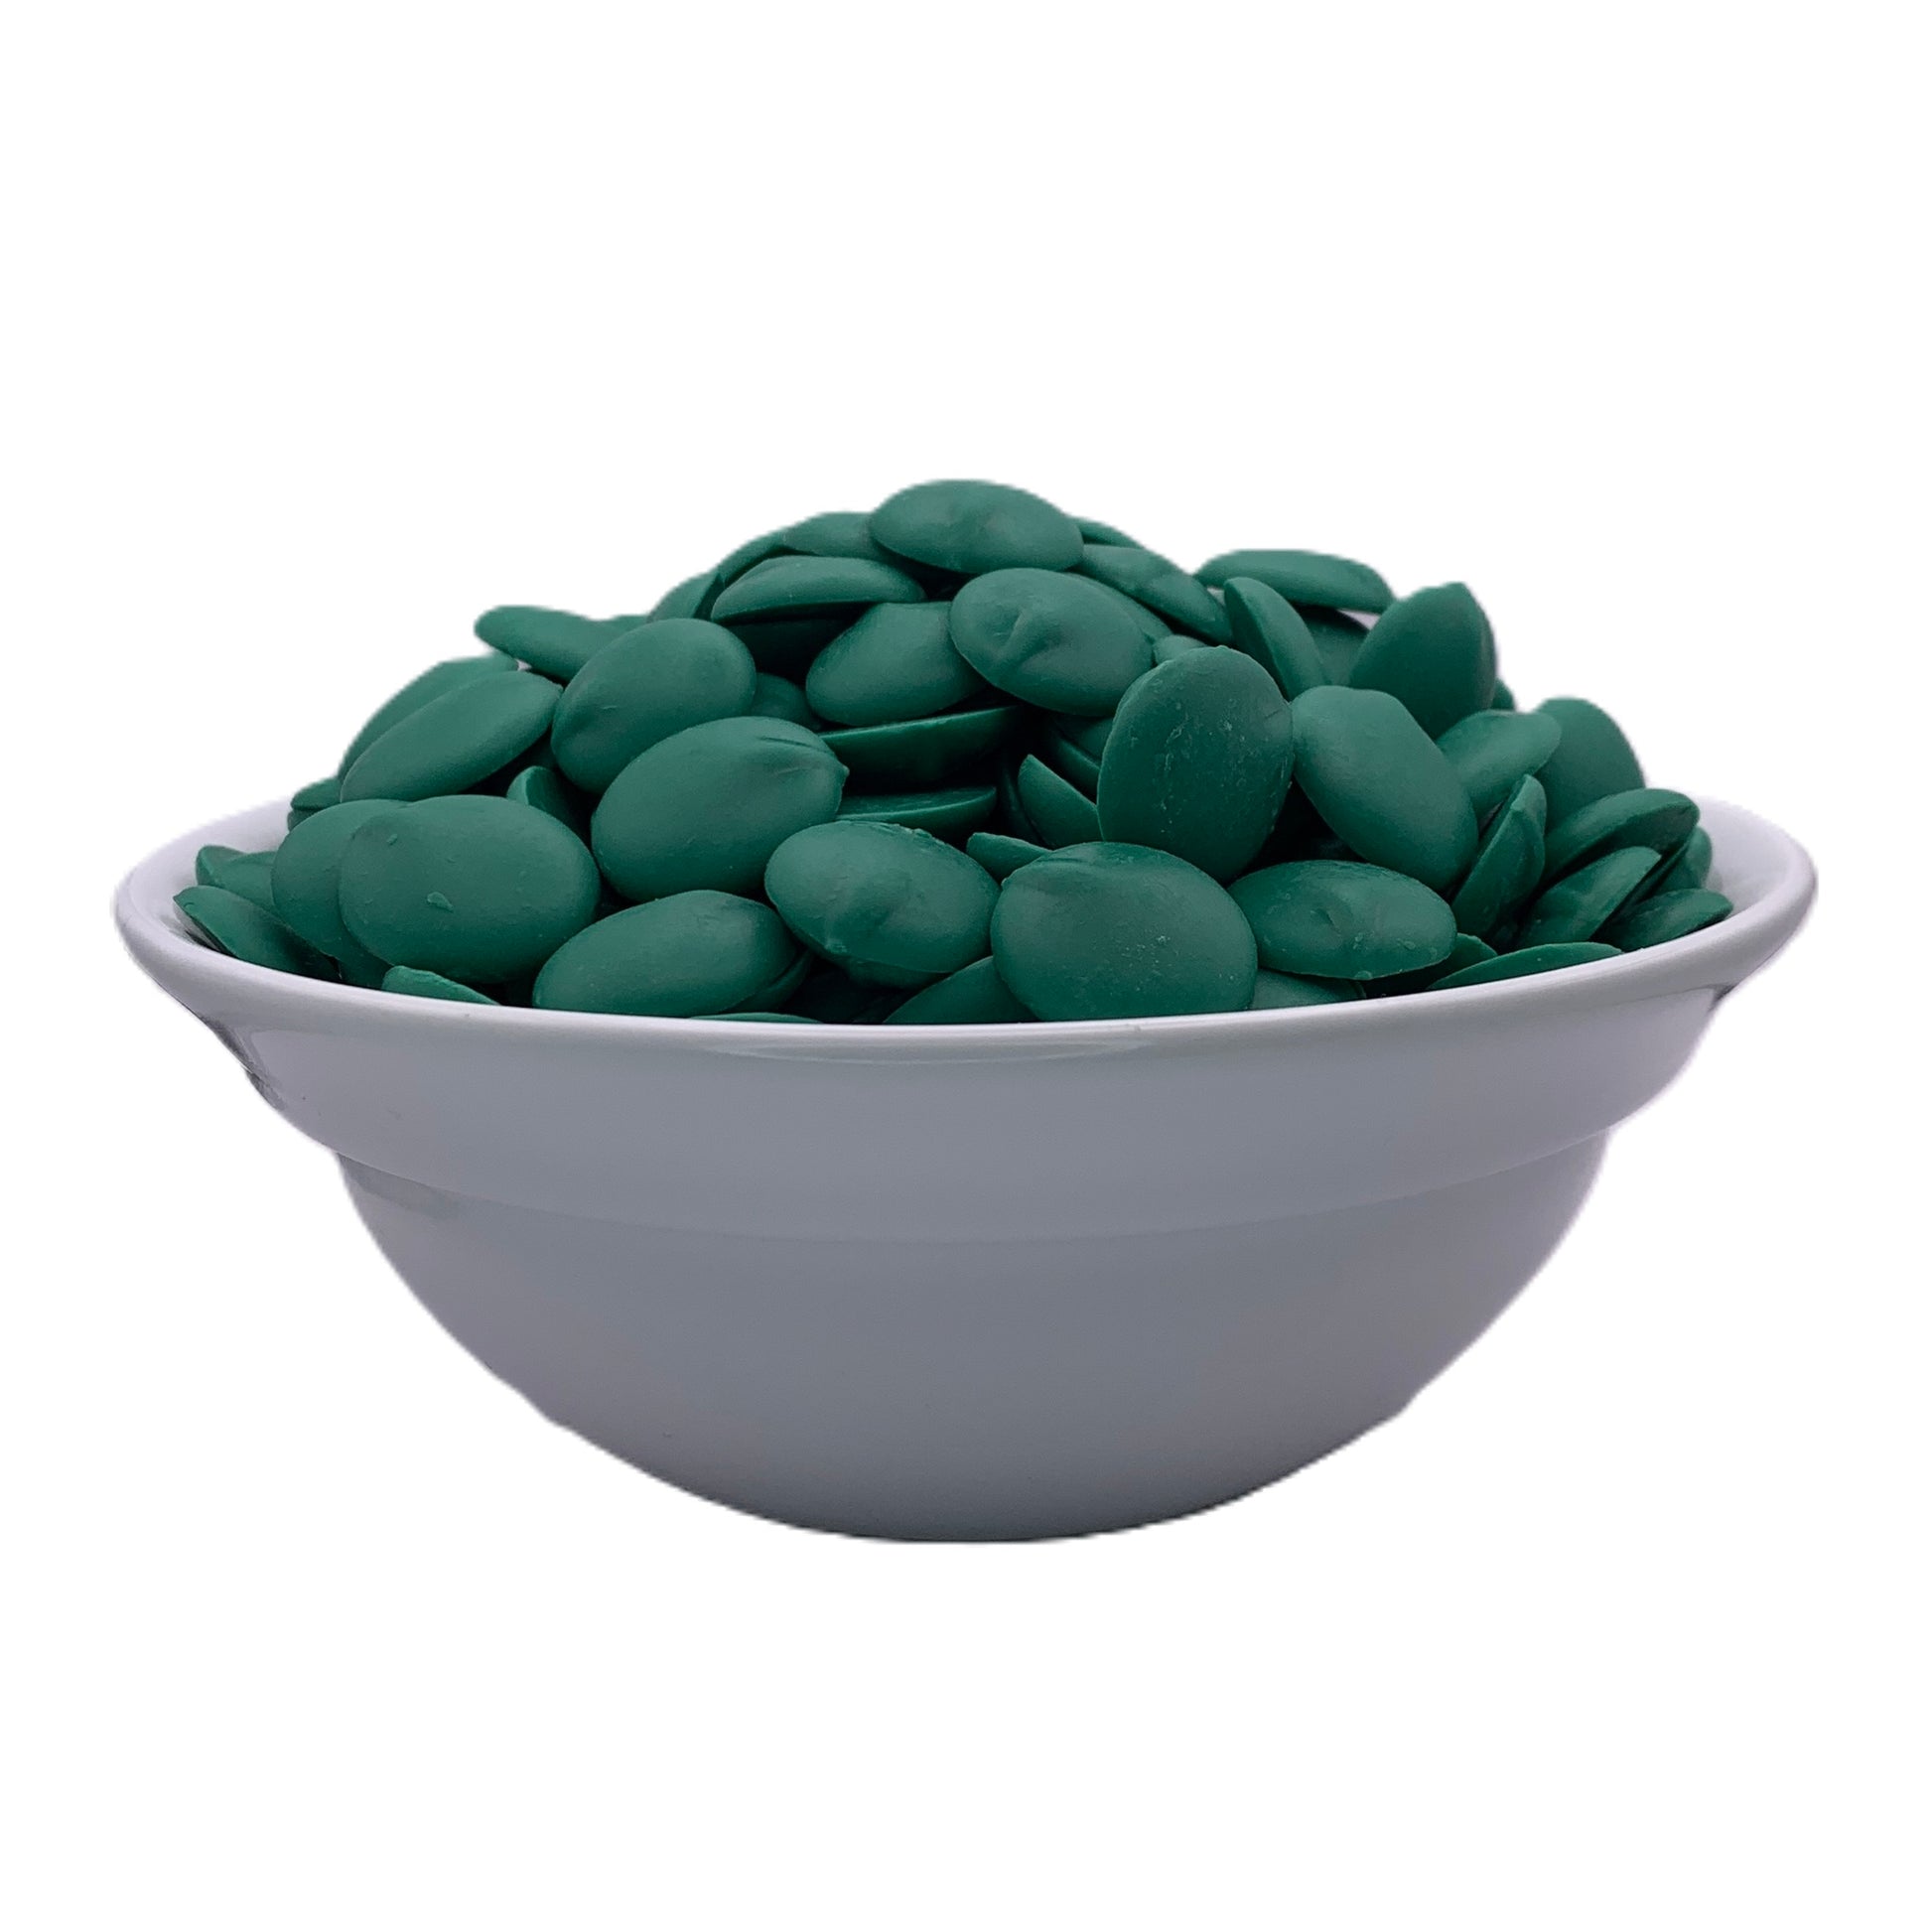 Bowl of Merckens dark green chocolate melting wafers, shown from the front, featuring a deep green color suitable for festive treats or themed party favors.